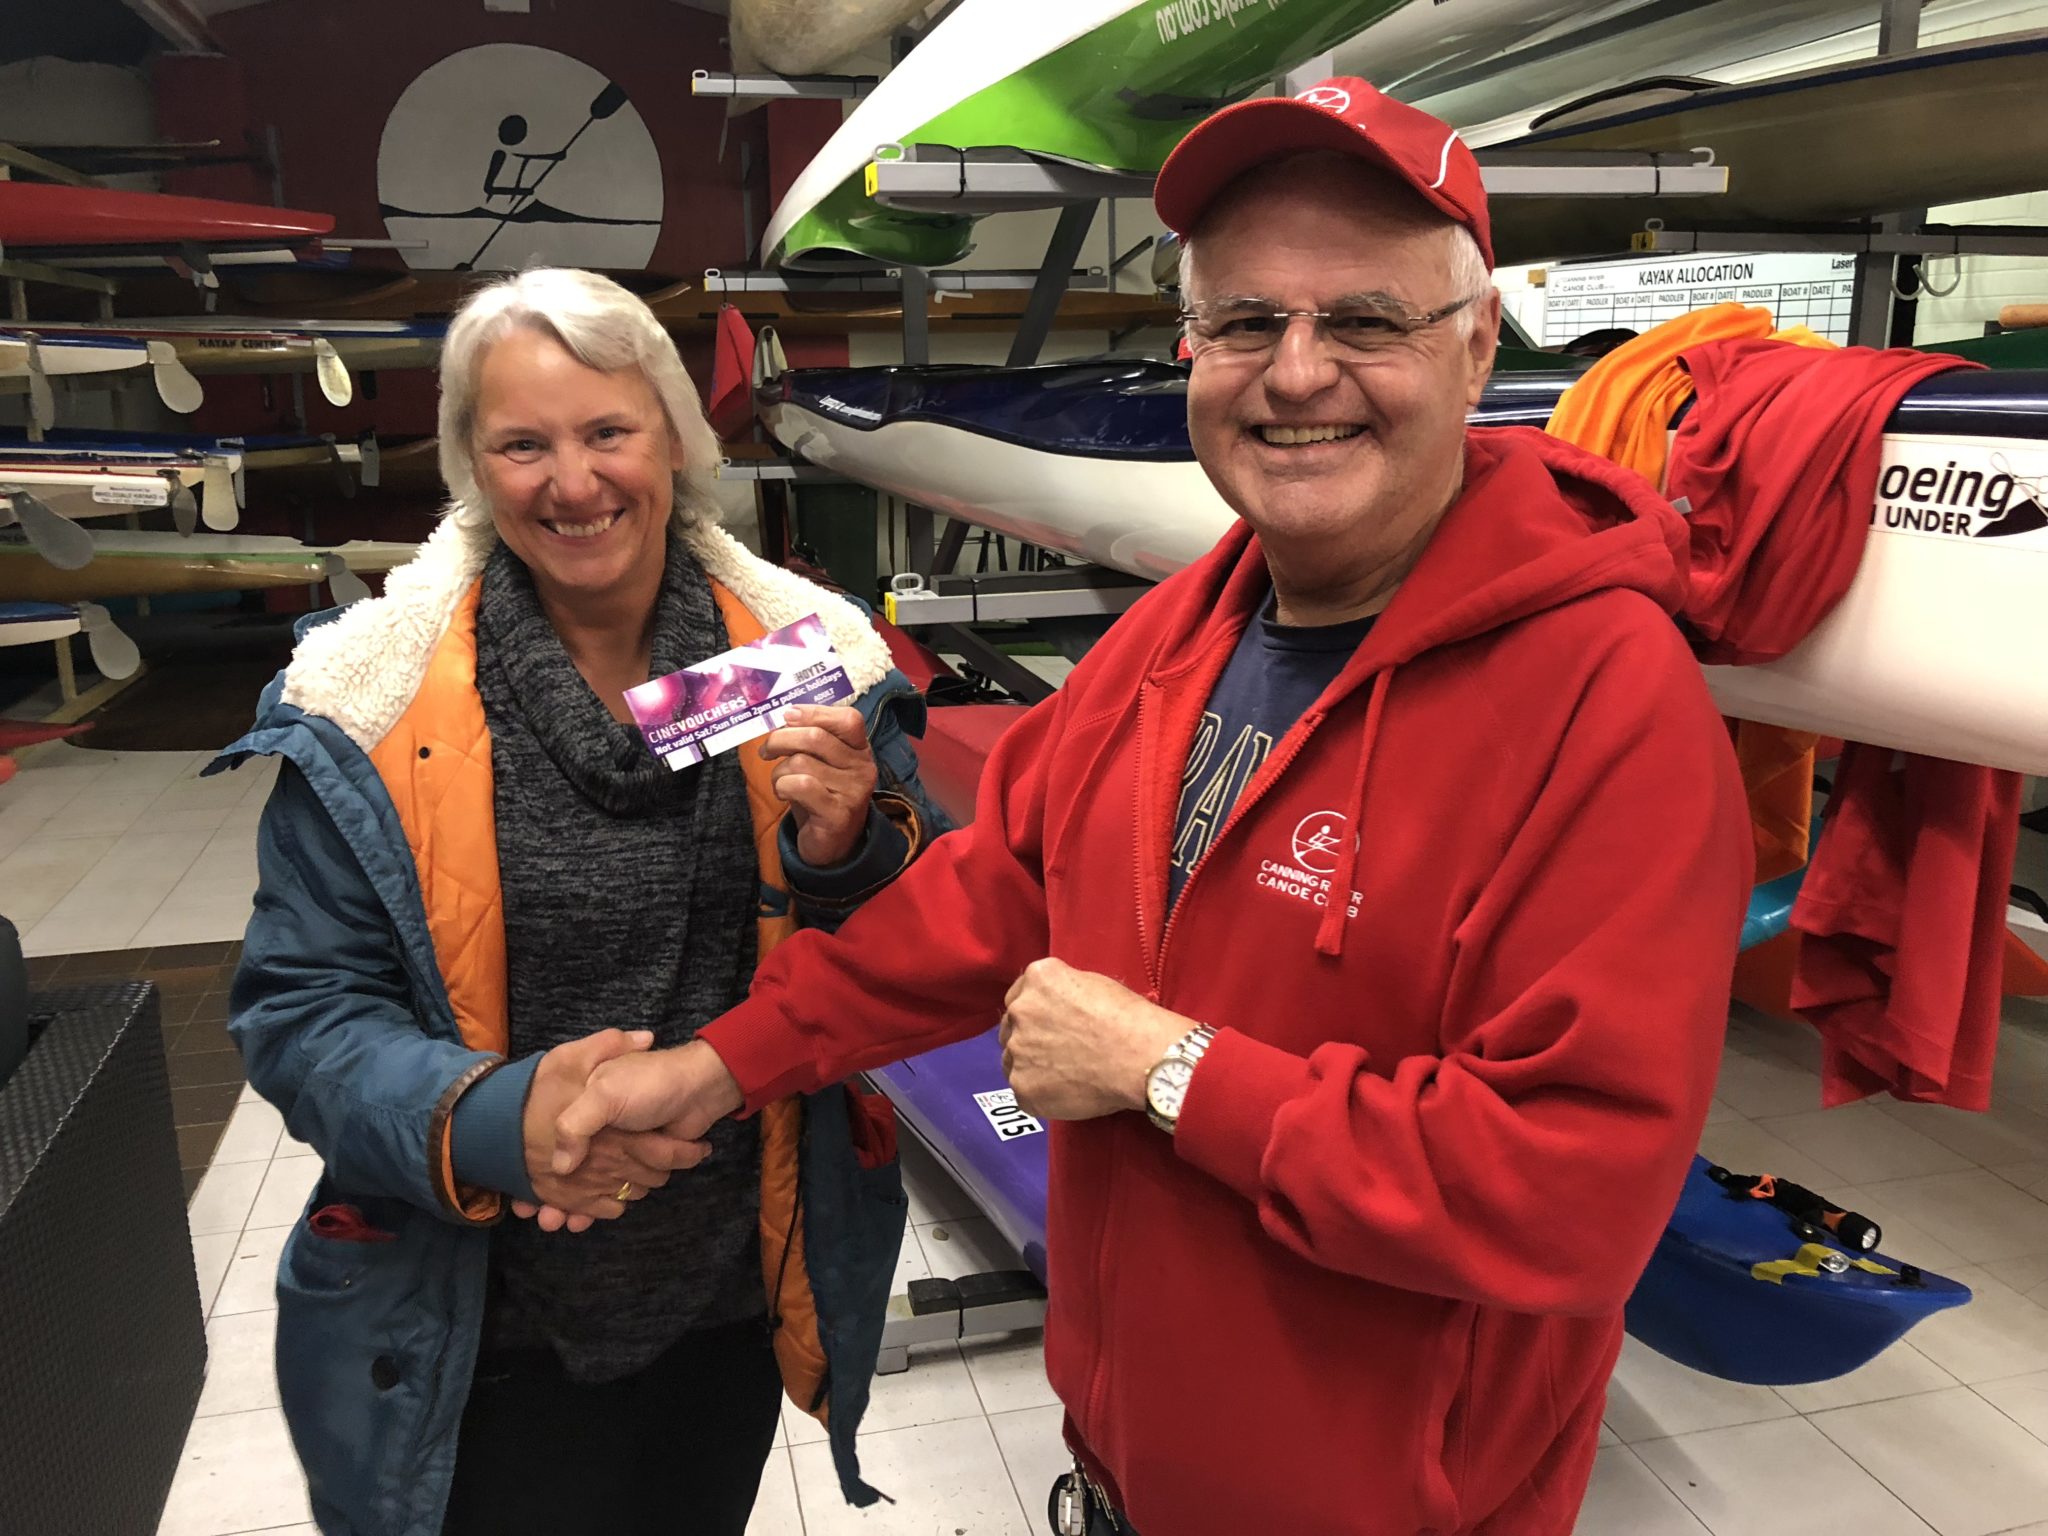 Tues 6th November 2018 : Tonight’s photo shows club member Les presenting Eve McNicol with a movie voucher